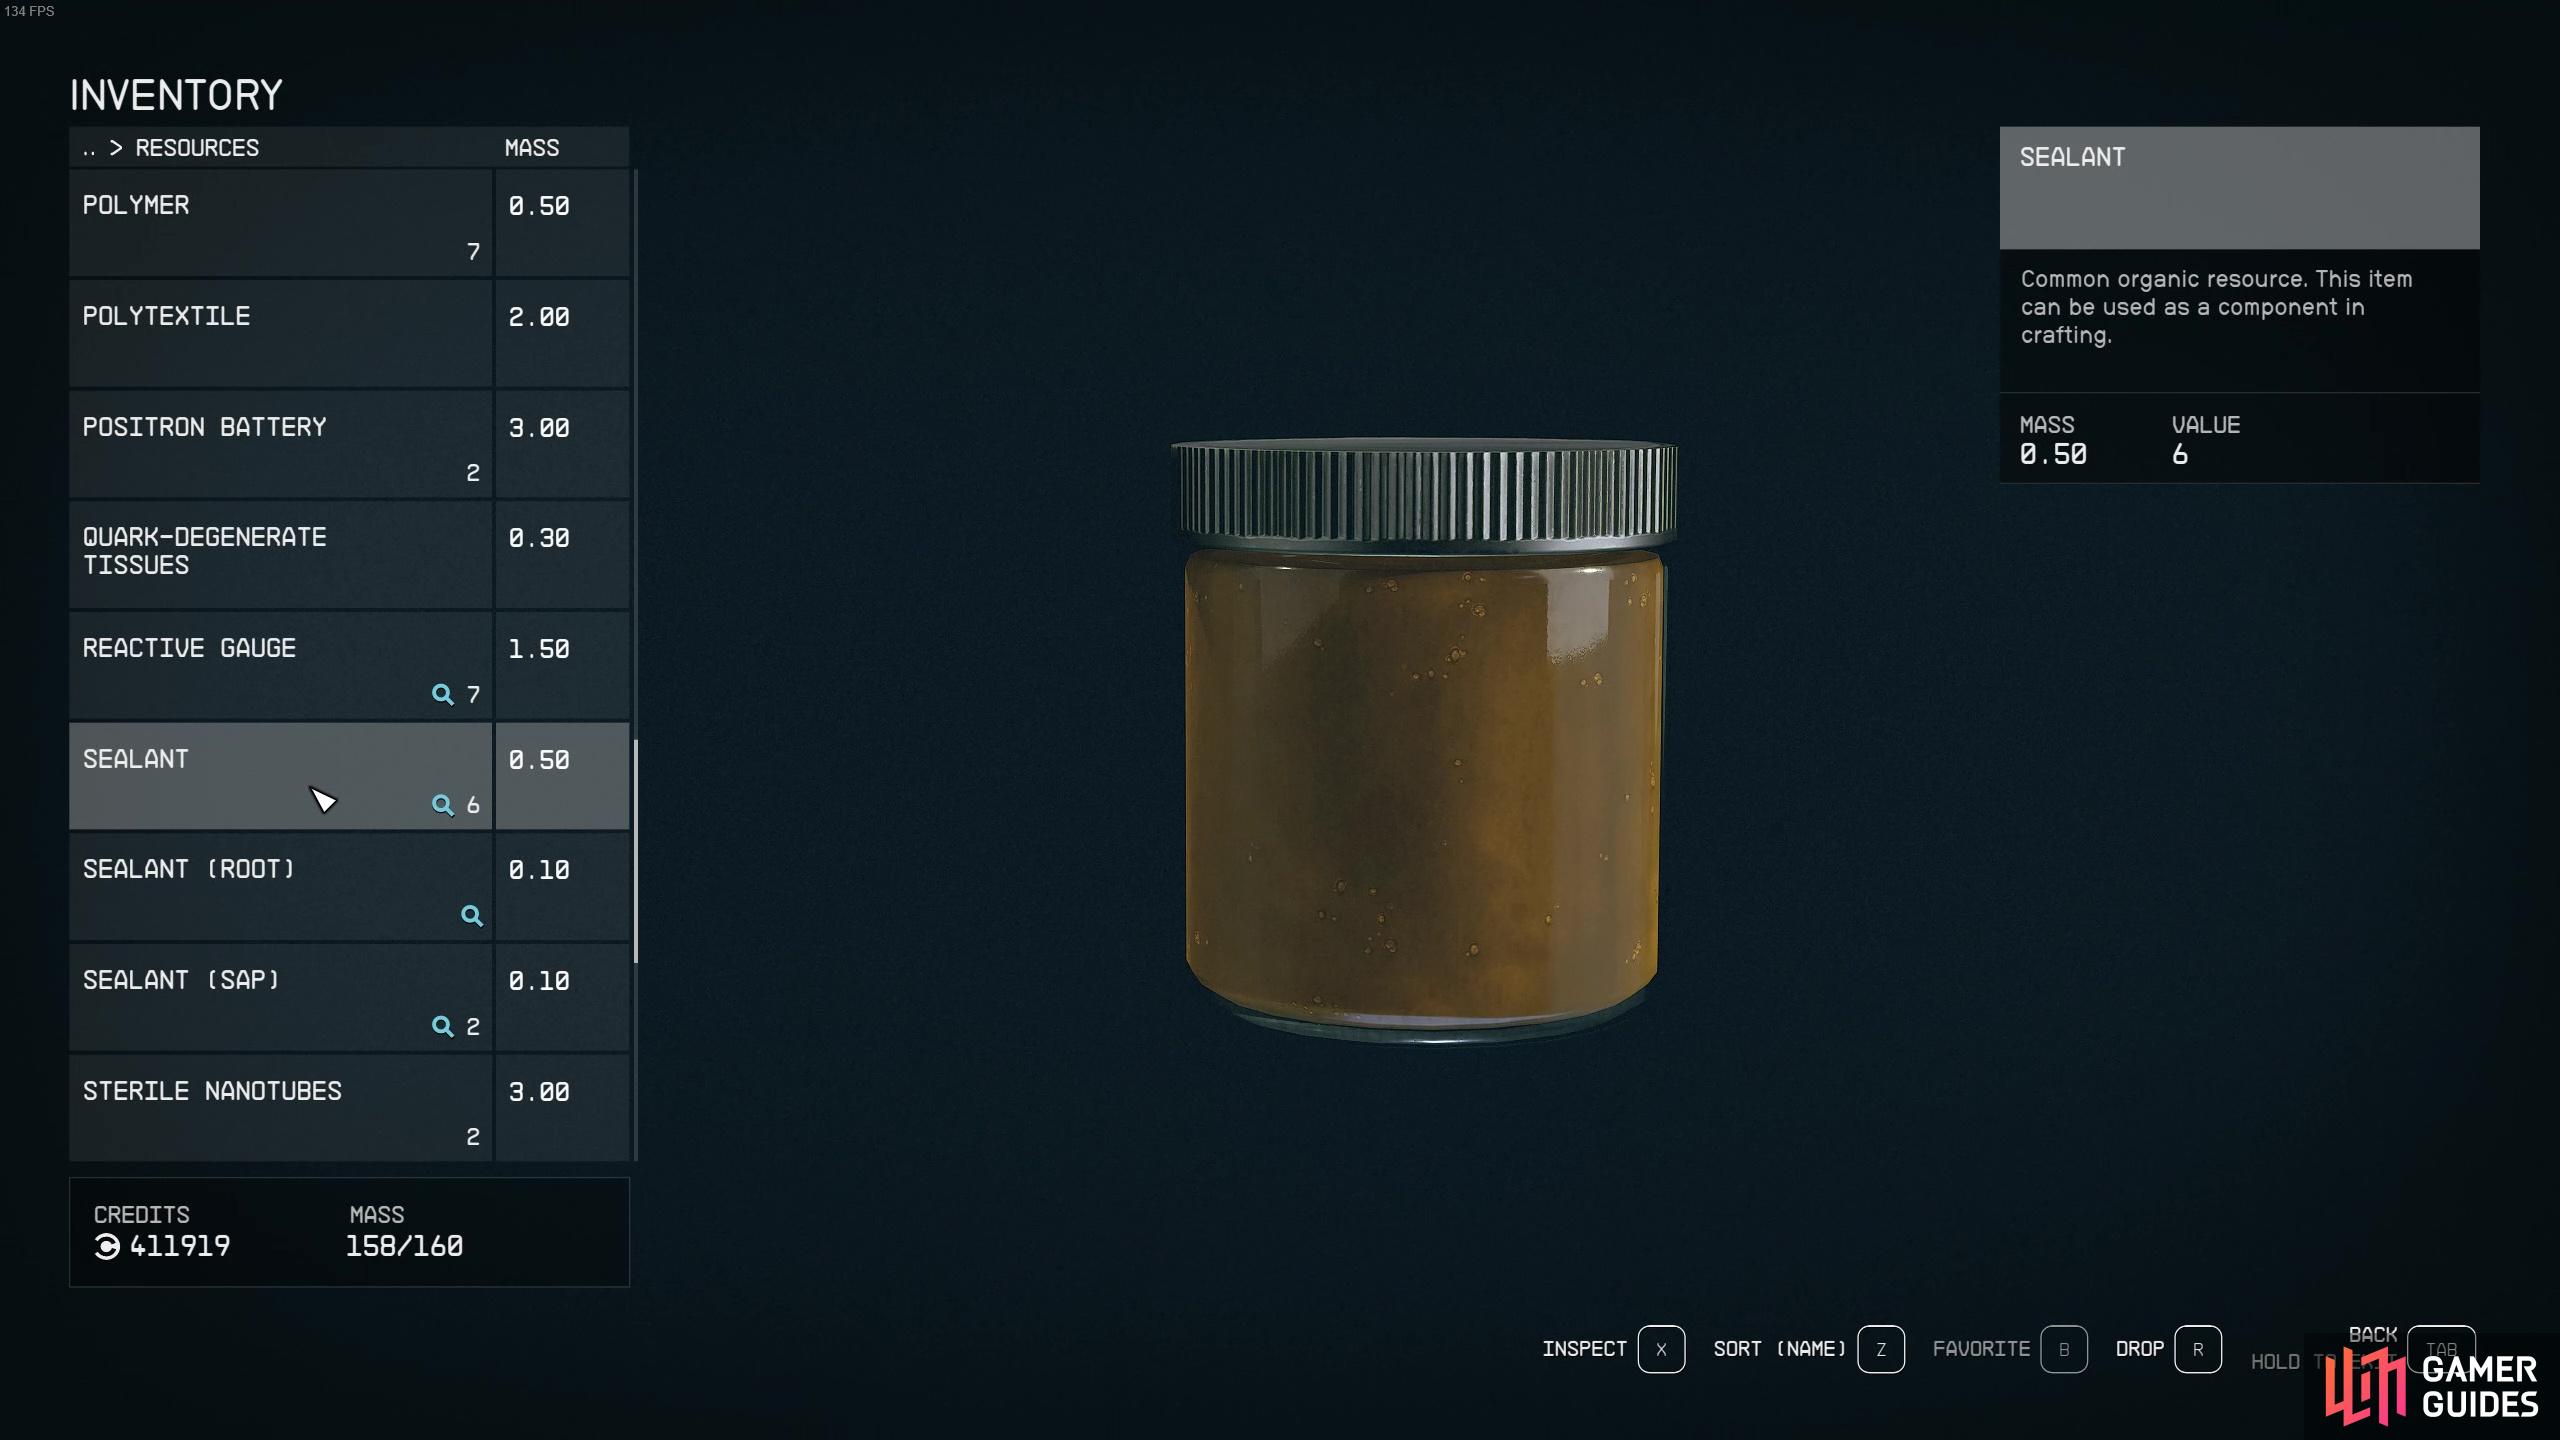 Sealant is a glue like substance that is common in crafting, research, weapon mods and more.